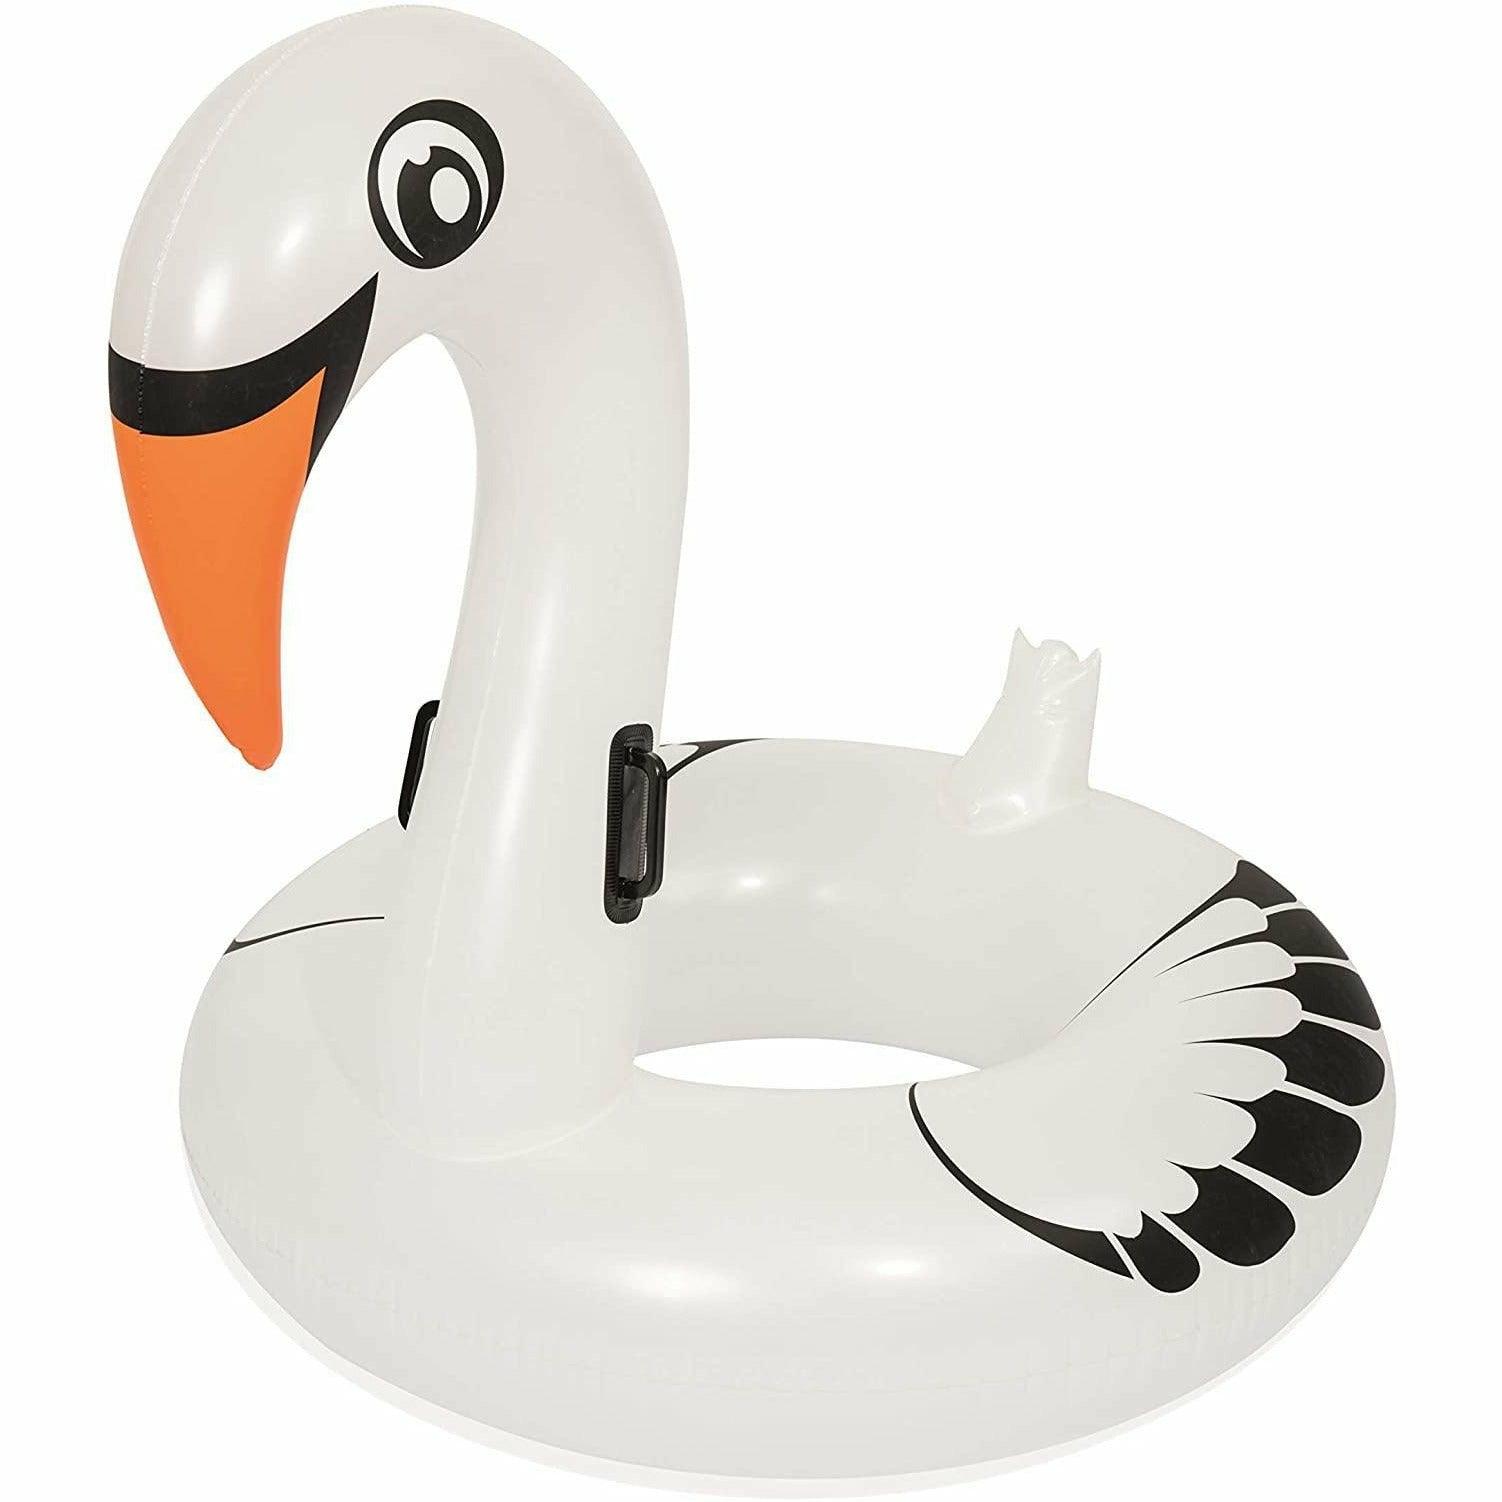 Bestway 36124 Inflatable Geese Shaped Swim Ring - White - BumbleToys - 5-7 Years, 8-13 Years, Eagle Plus, Floaters, Girls, Sand Toys Pools & Inflatables